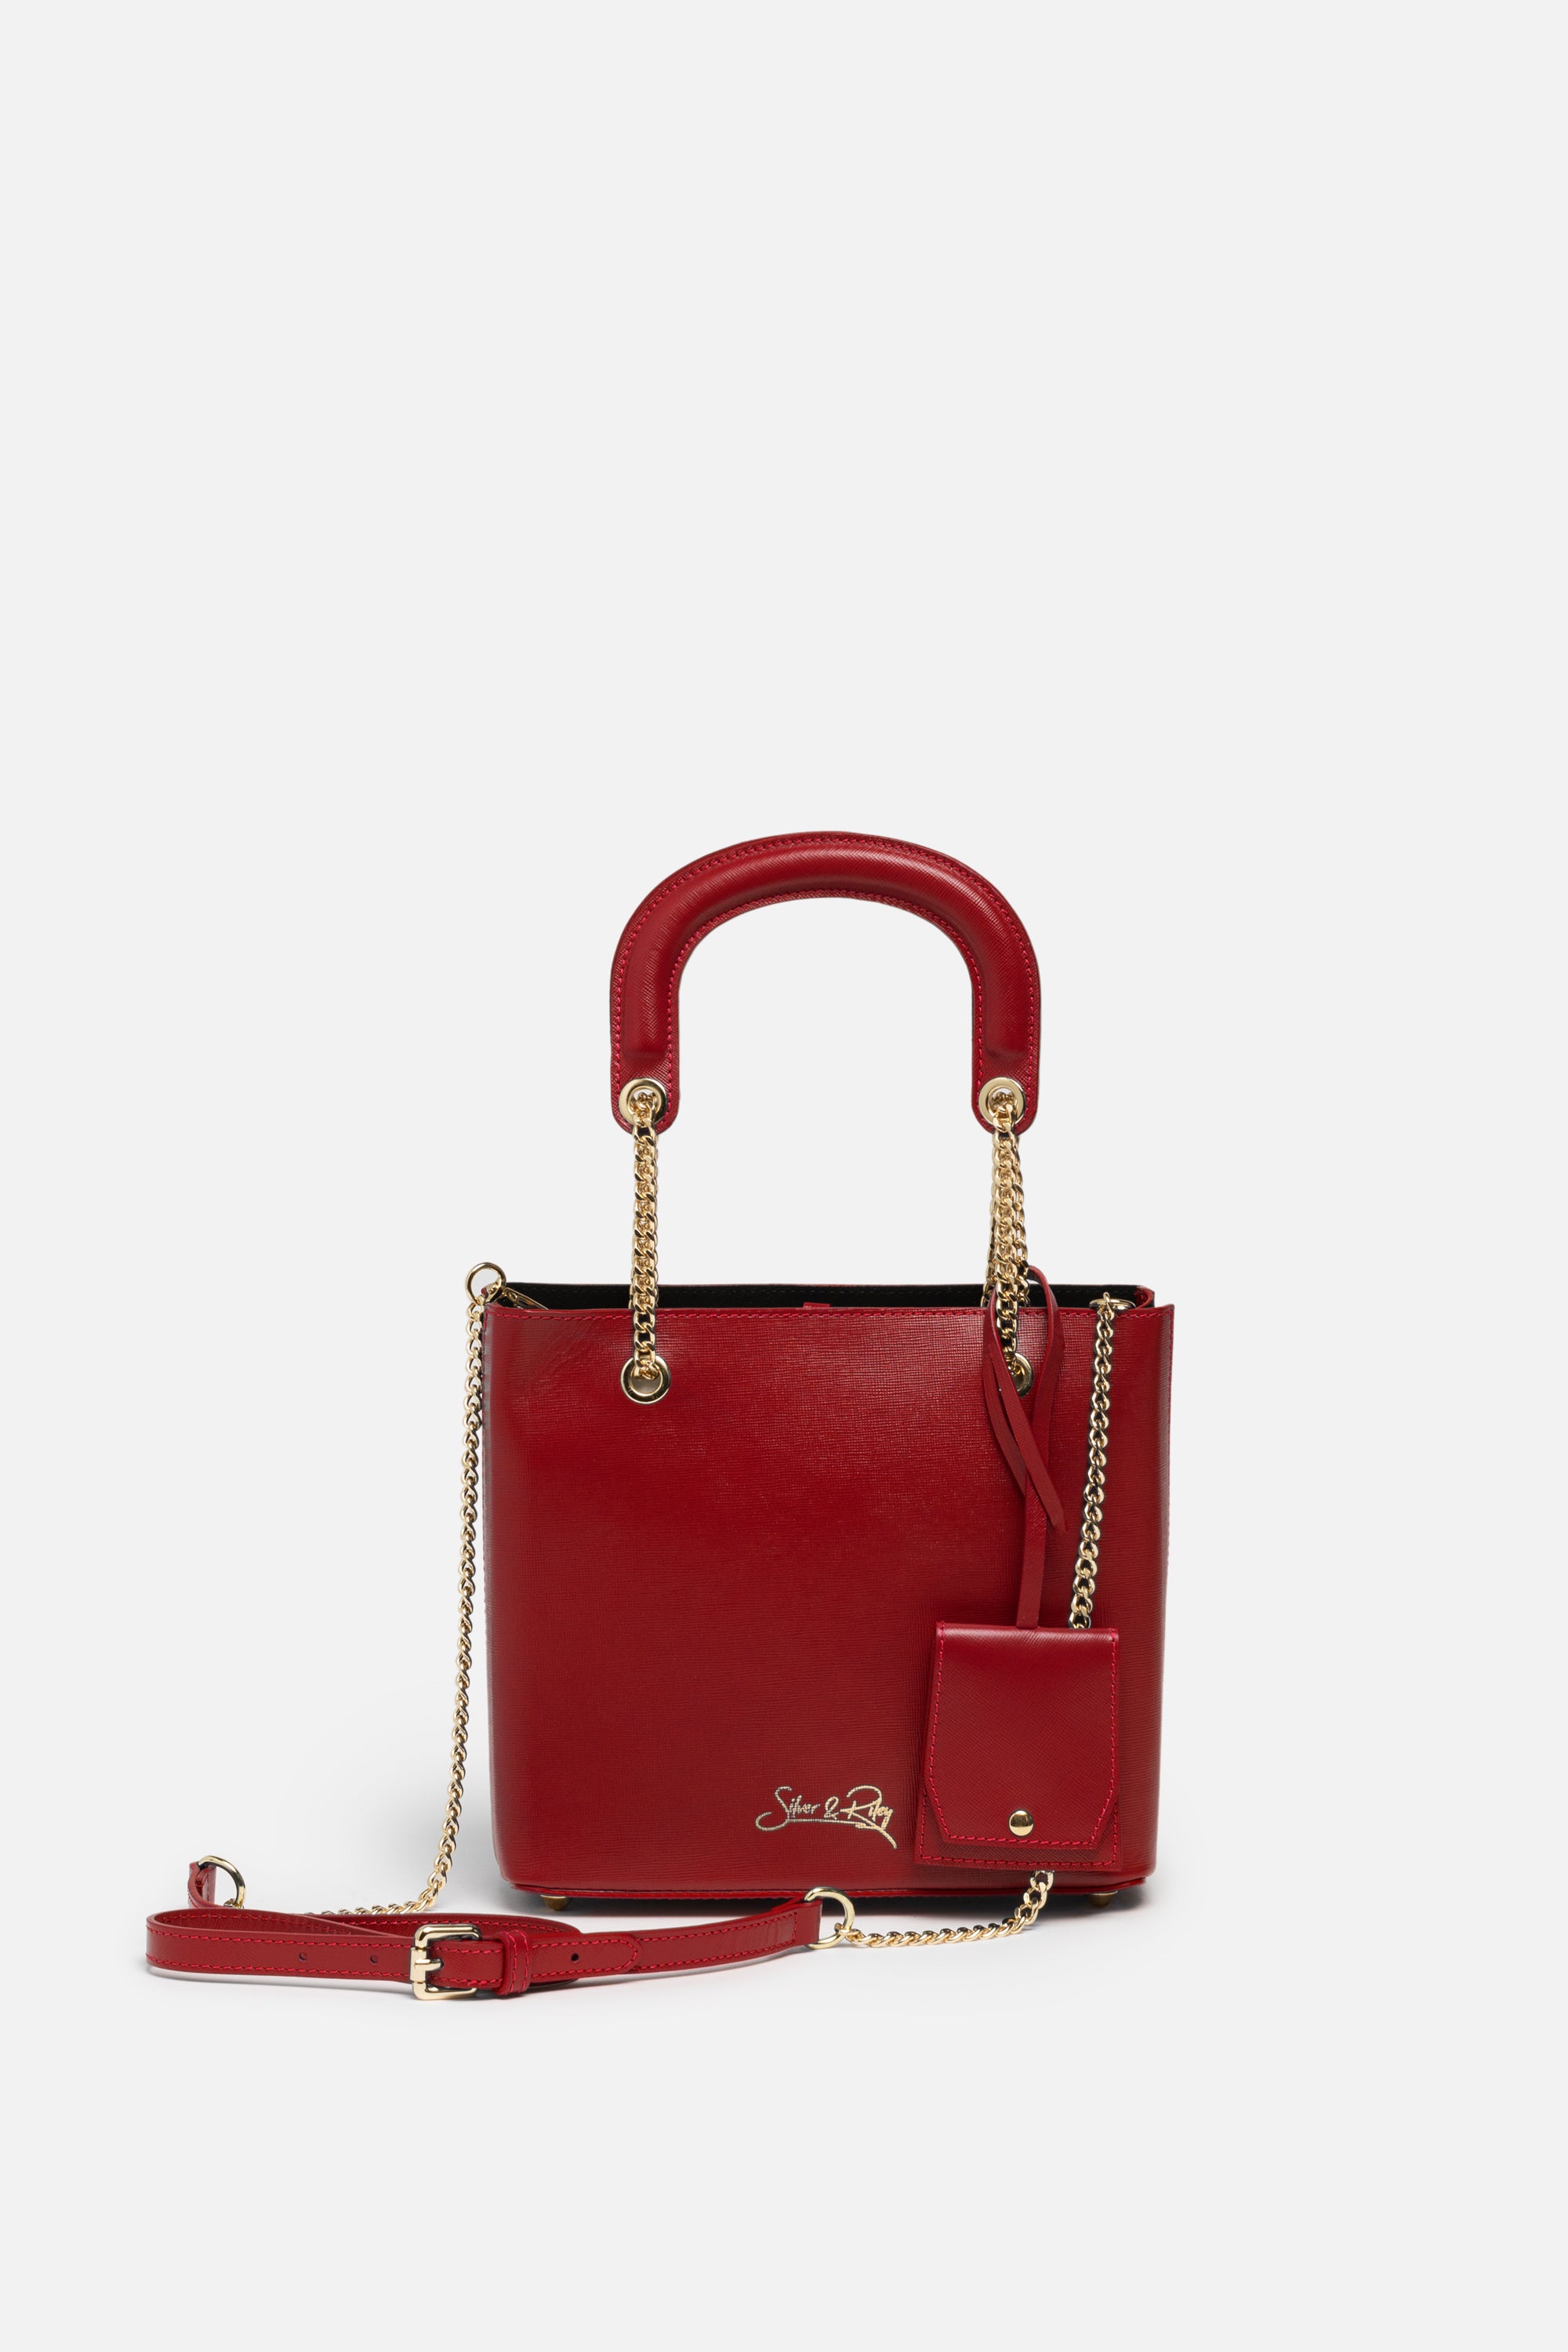 Dubai Crossbody and Lady Leather Bag in Red Passion | Silver & Riley